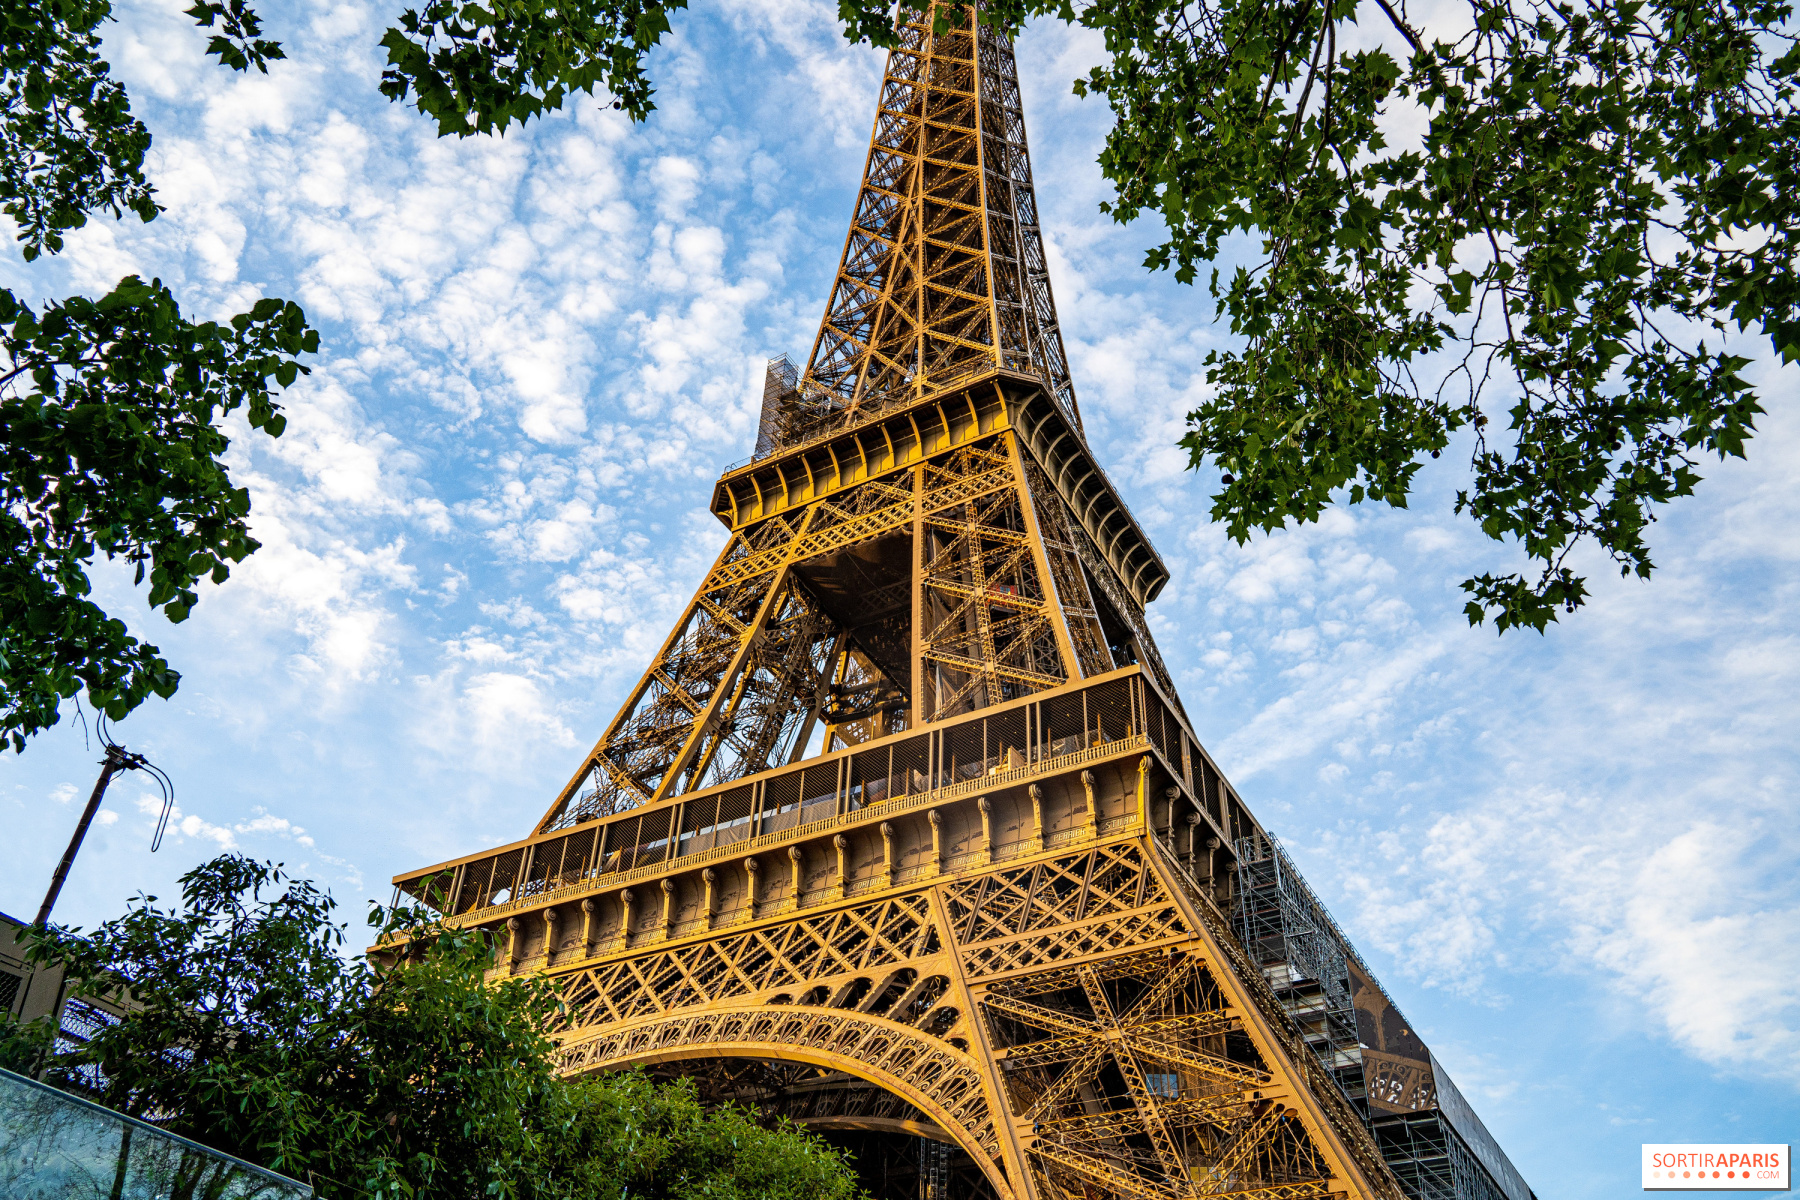 The World's Biggest Towers - OFFICIAL Eiffel Tower Website